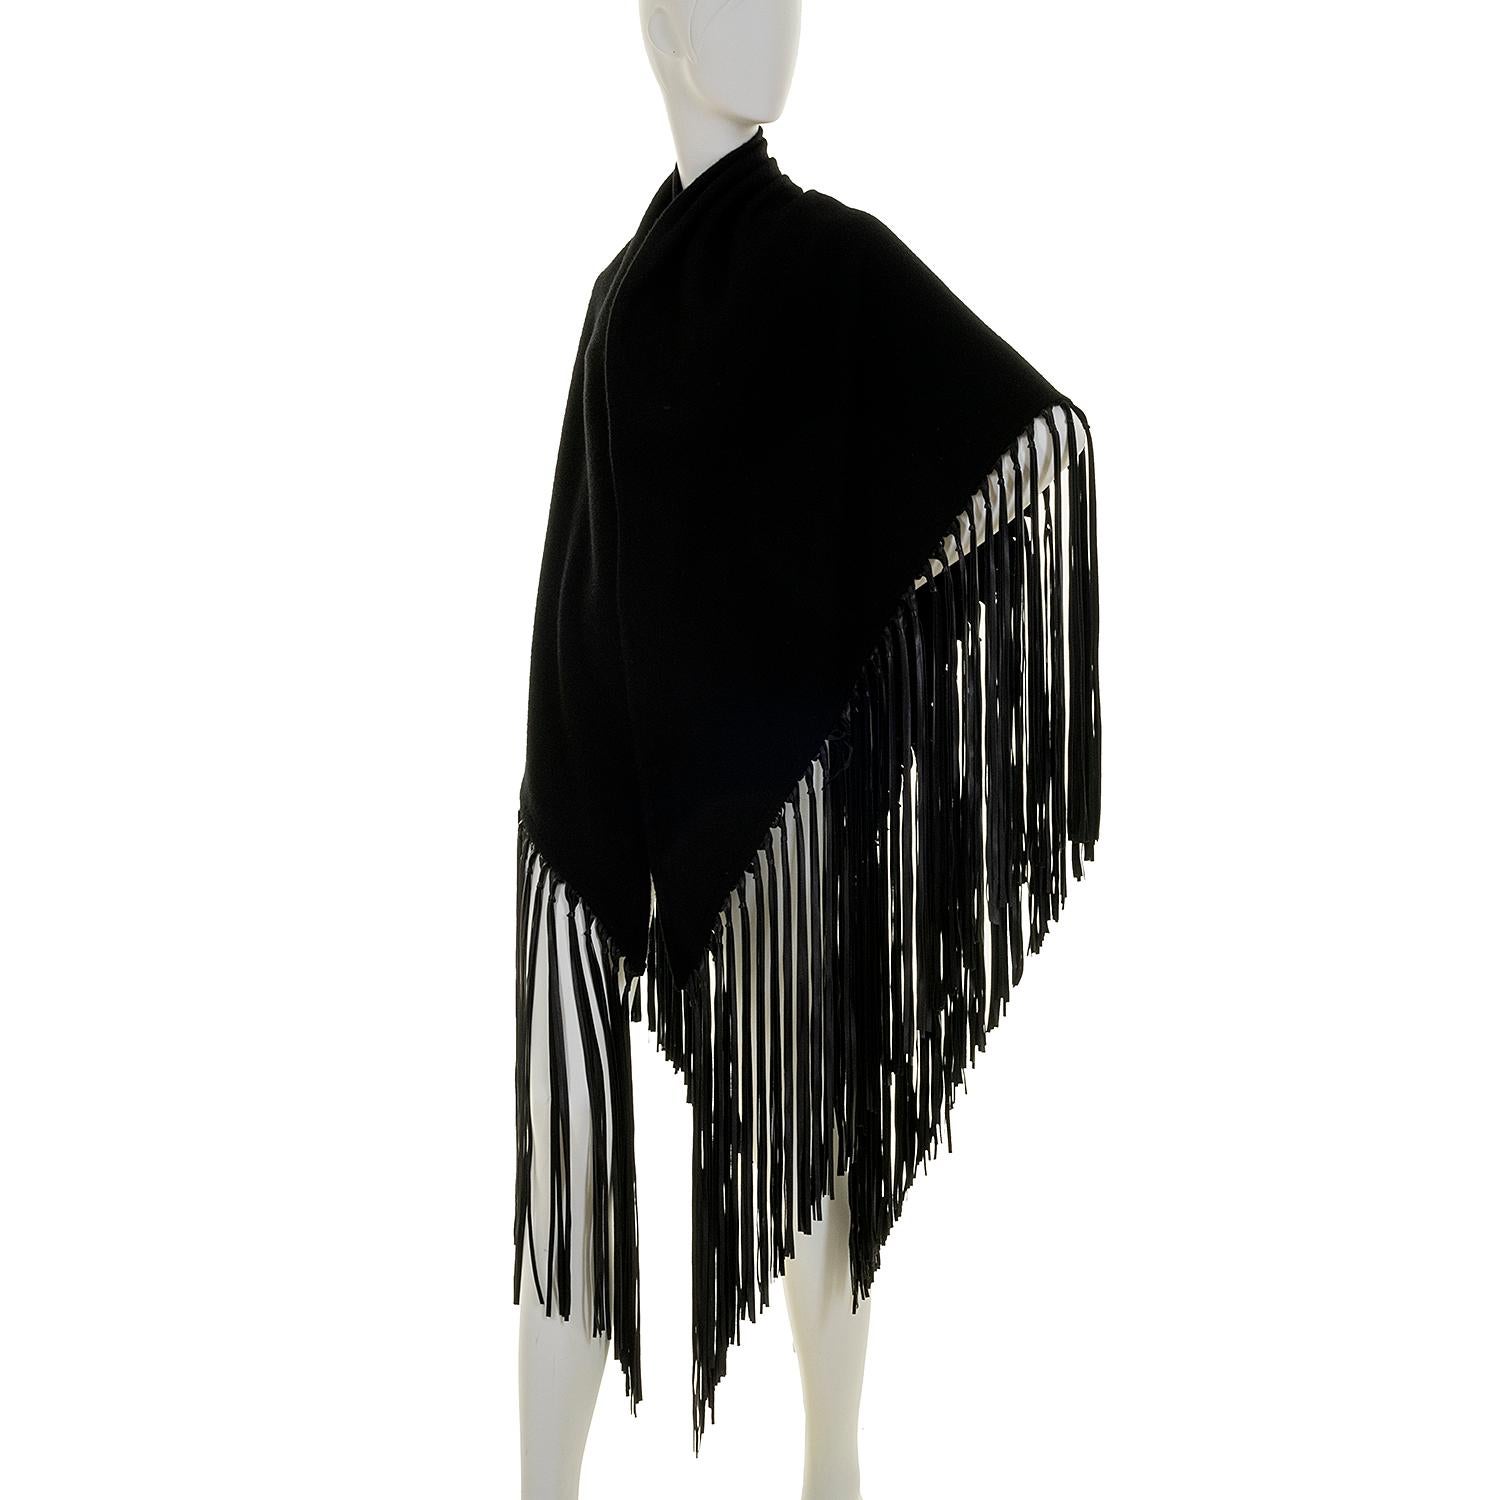 Tres Chic Hermes Black Cashmere & Wool Shawl Trimmed with Leather Tassel Fringe 1